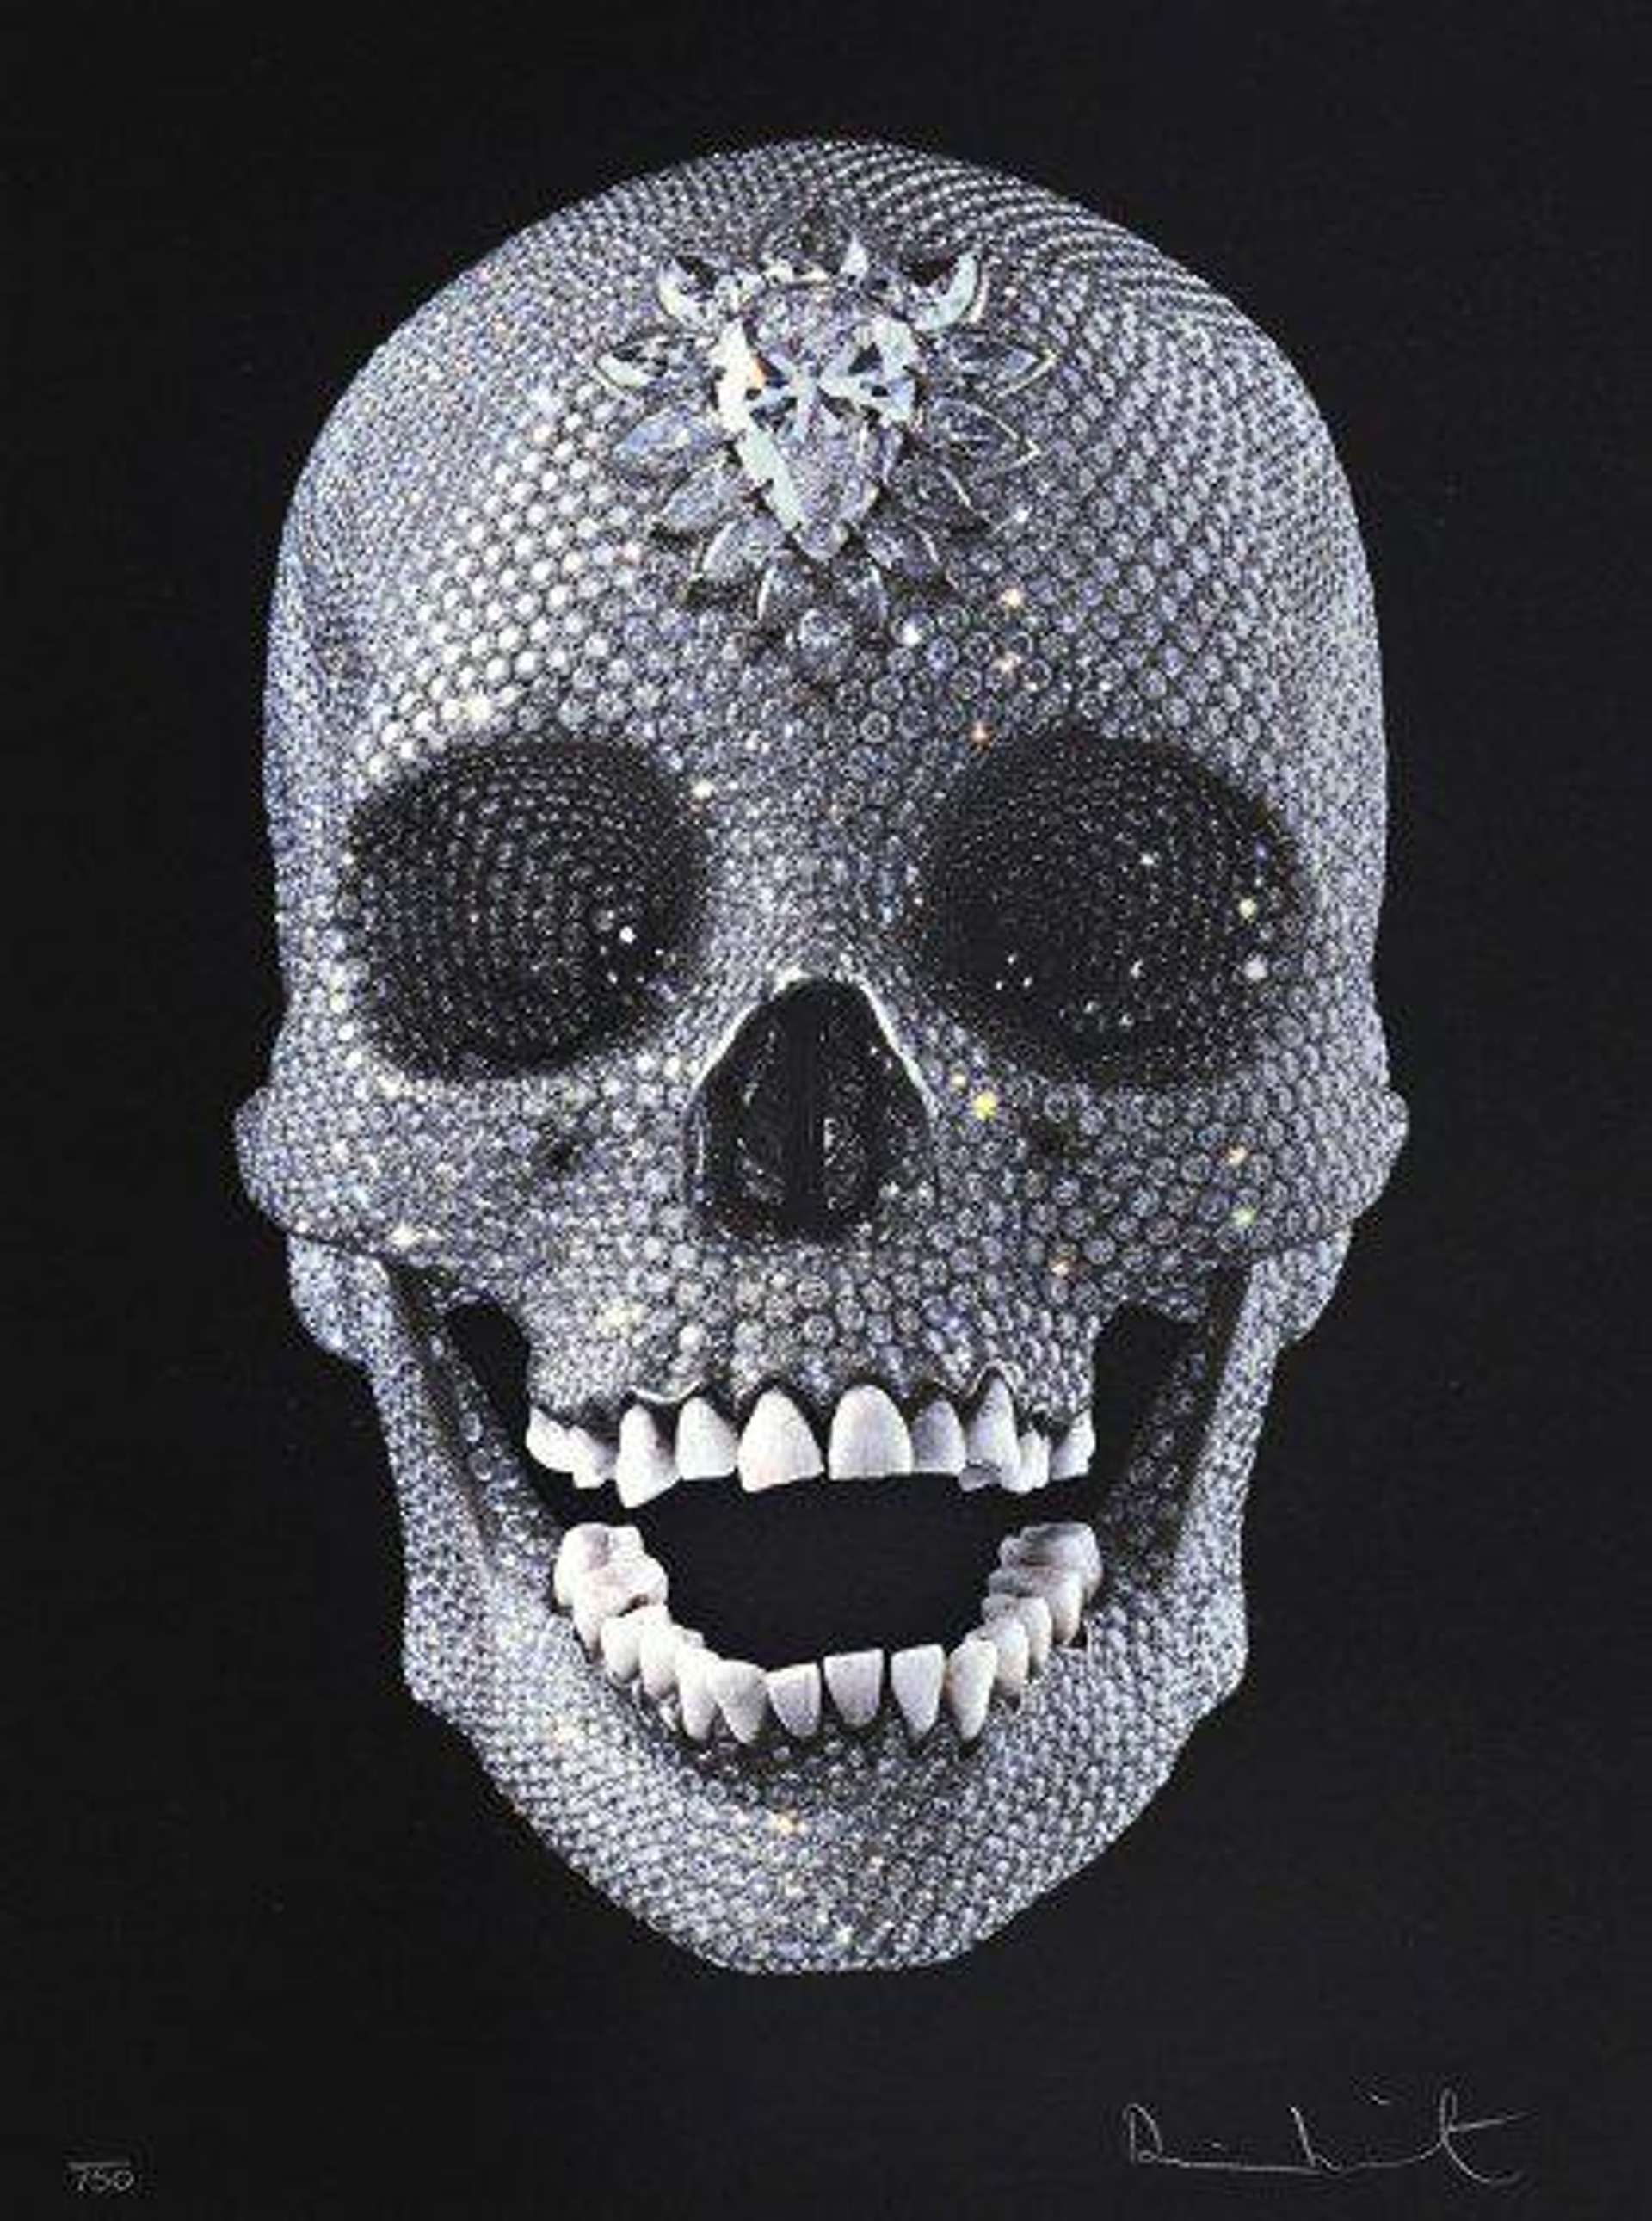 A screeprint by Damien Hirst depicting a diamond-encrusted skull against a black background.